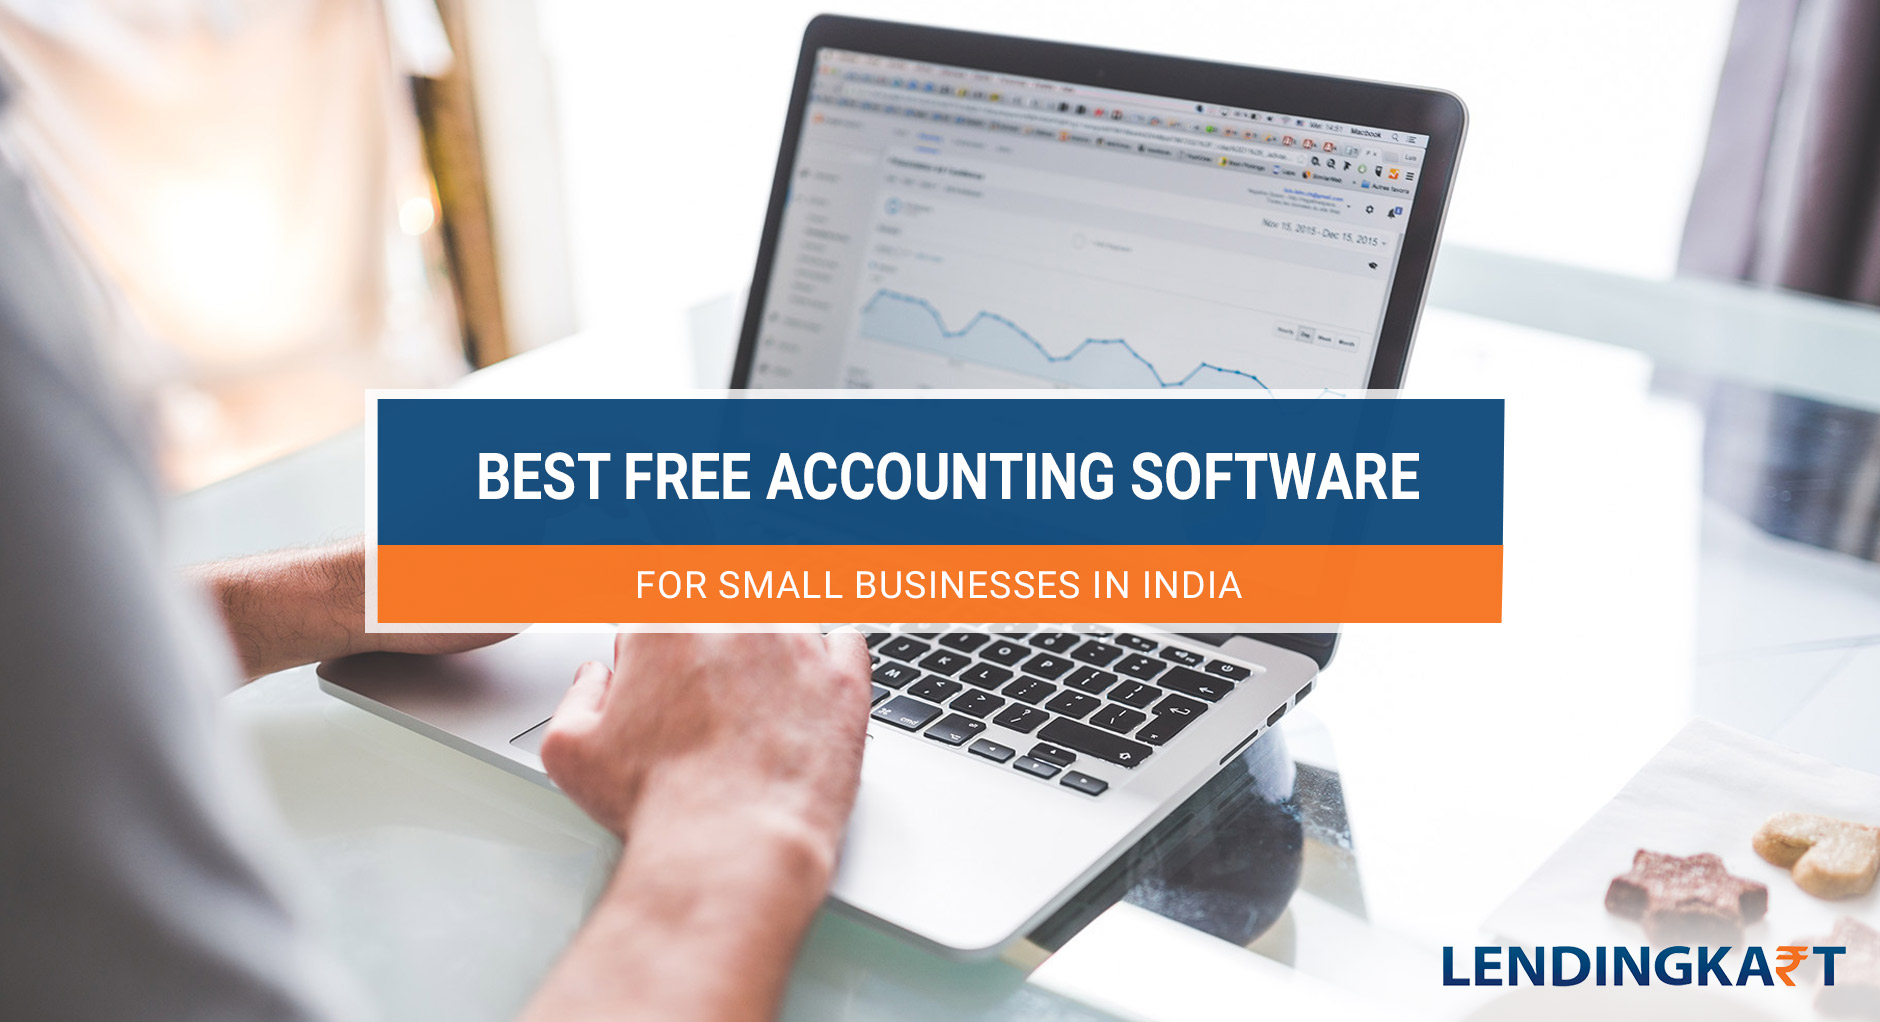 Open Source Accounting Software For Mac Os X